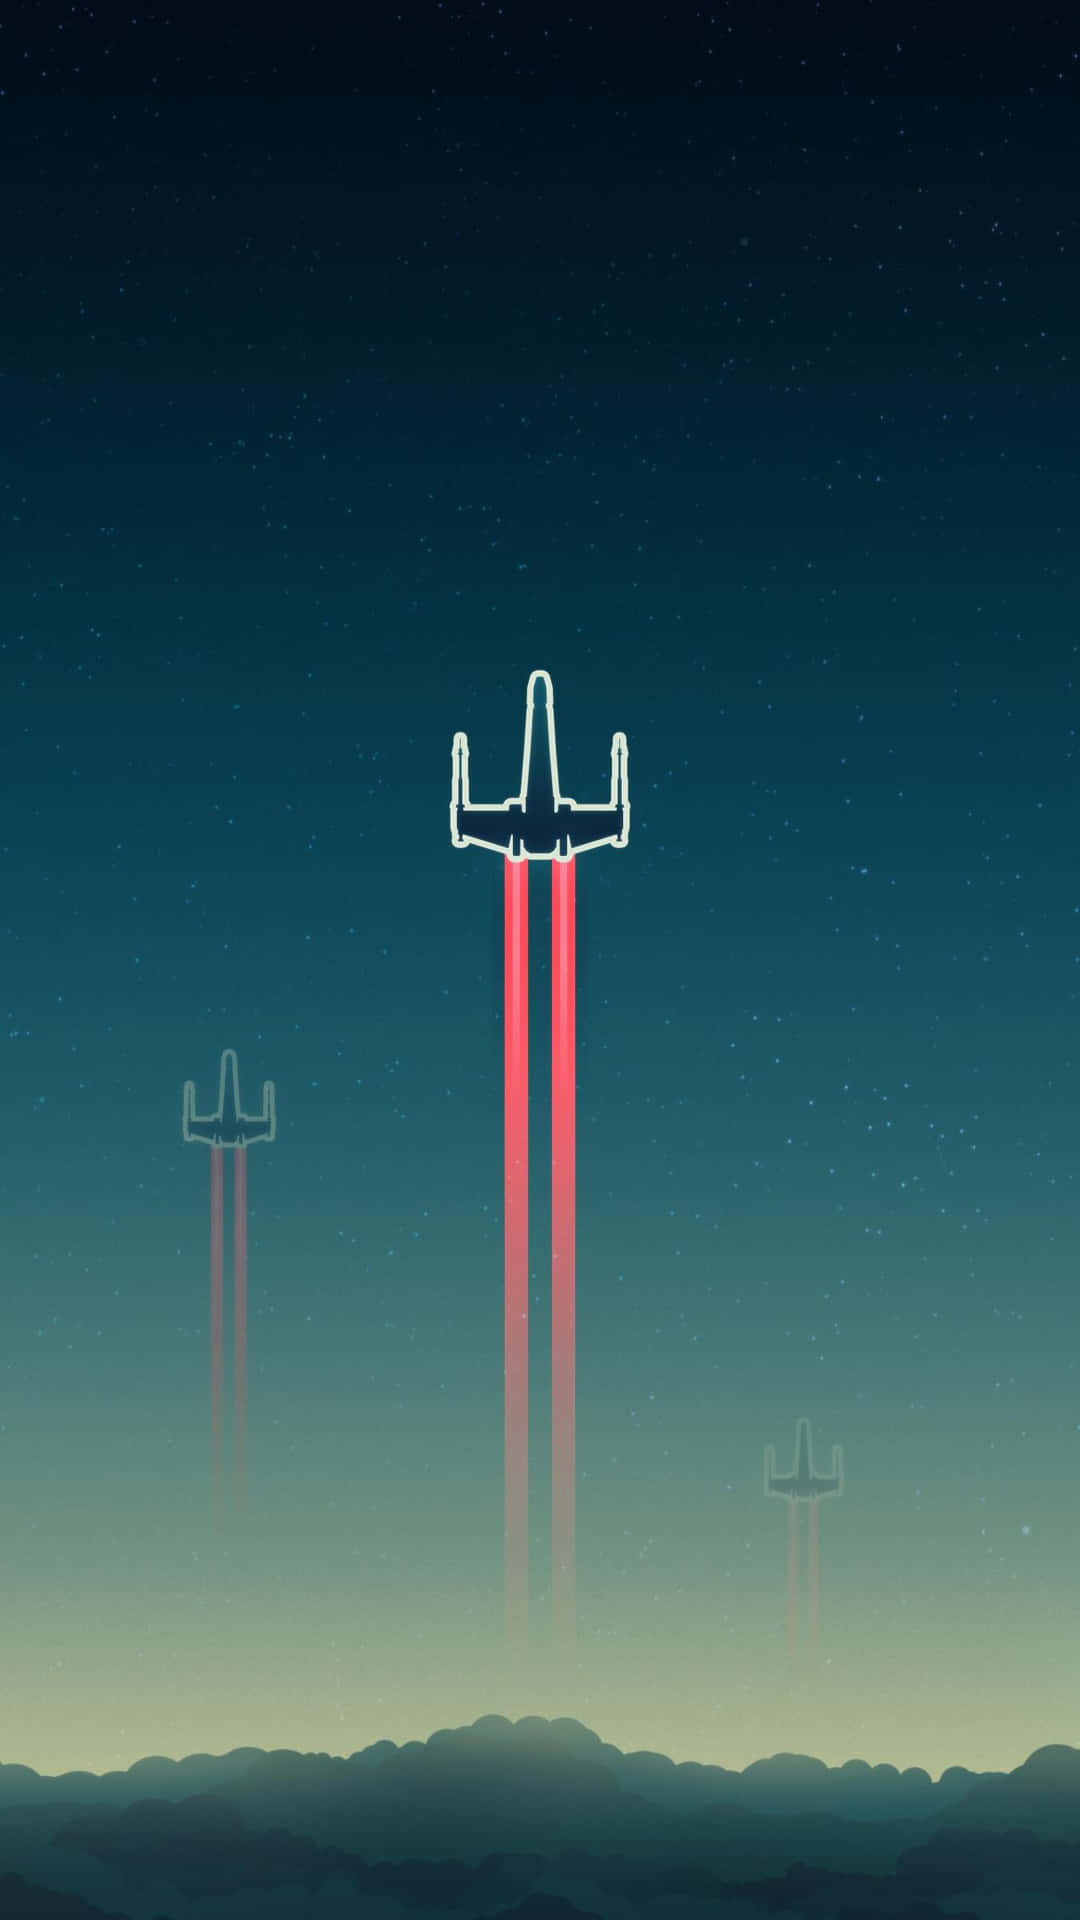 Stay connected to the Force in style with the Star Wars Phone Wallpaper